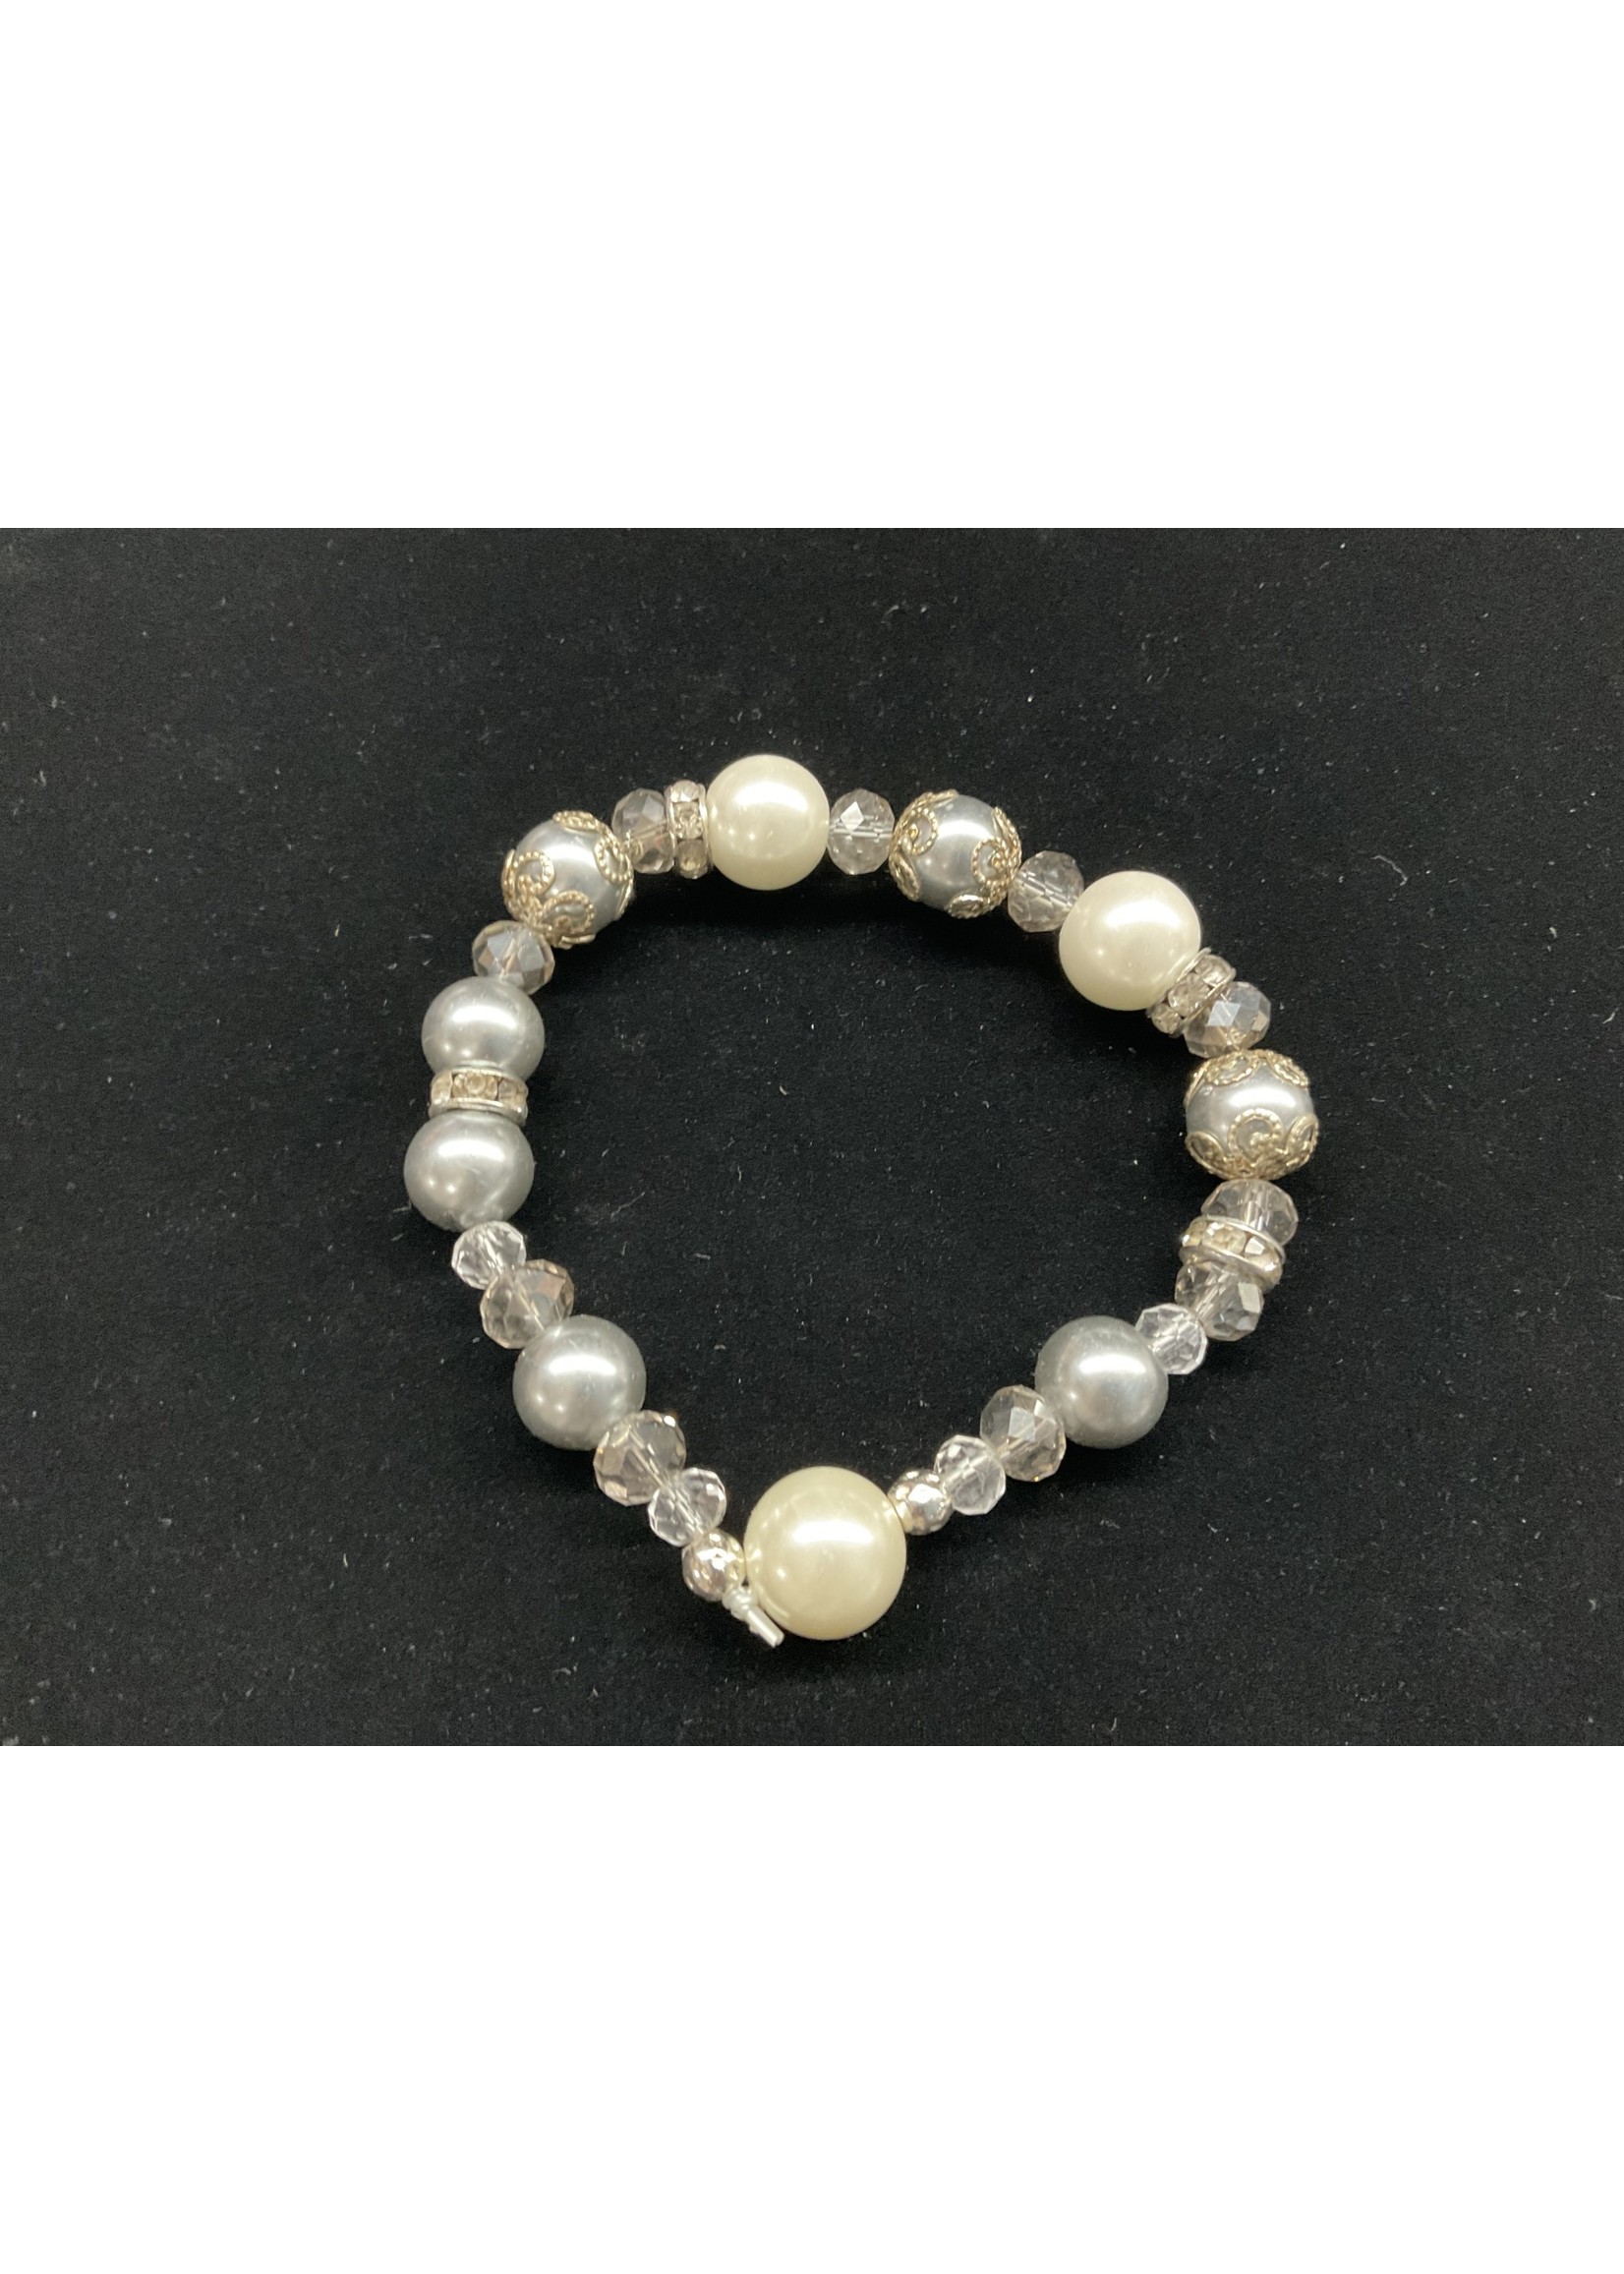 Our Twisted Dahlia B40 Bracelet Elastic-Glass Pearl and Silver Filigree Beads